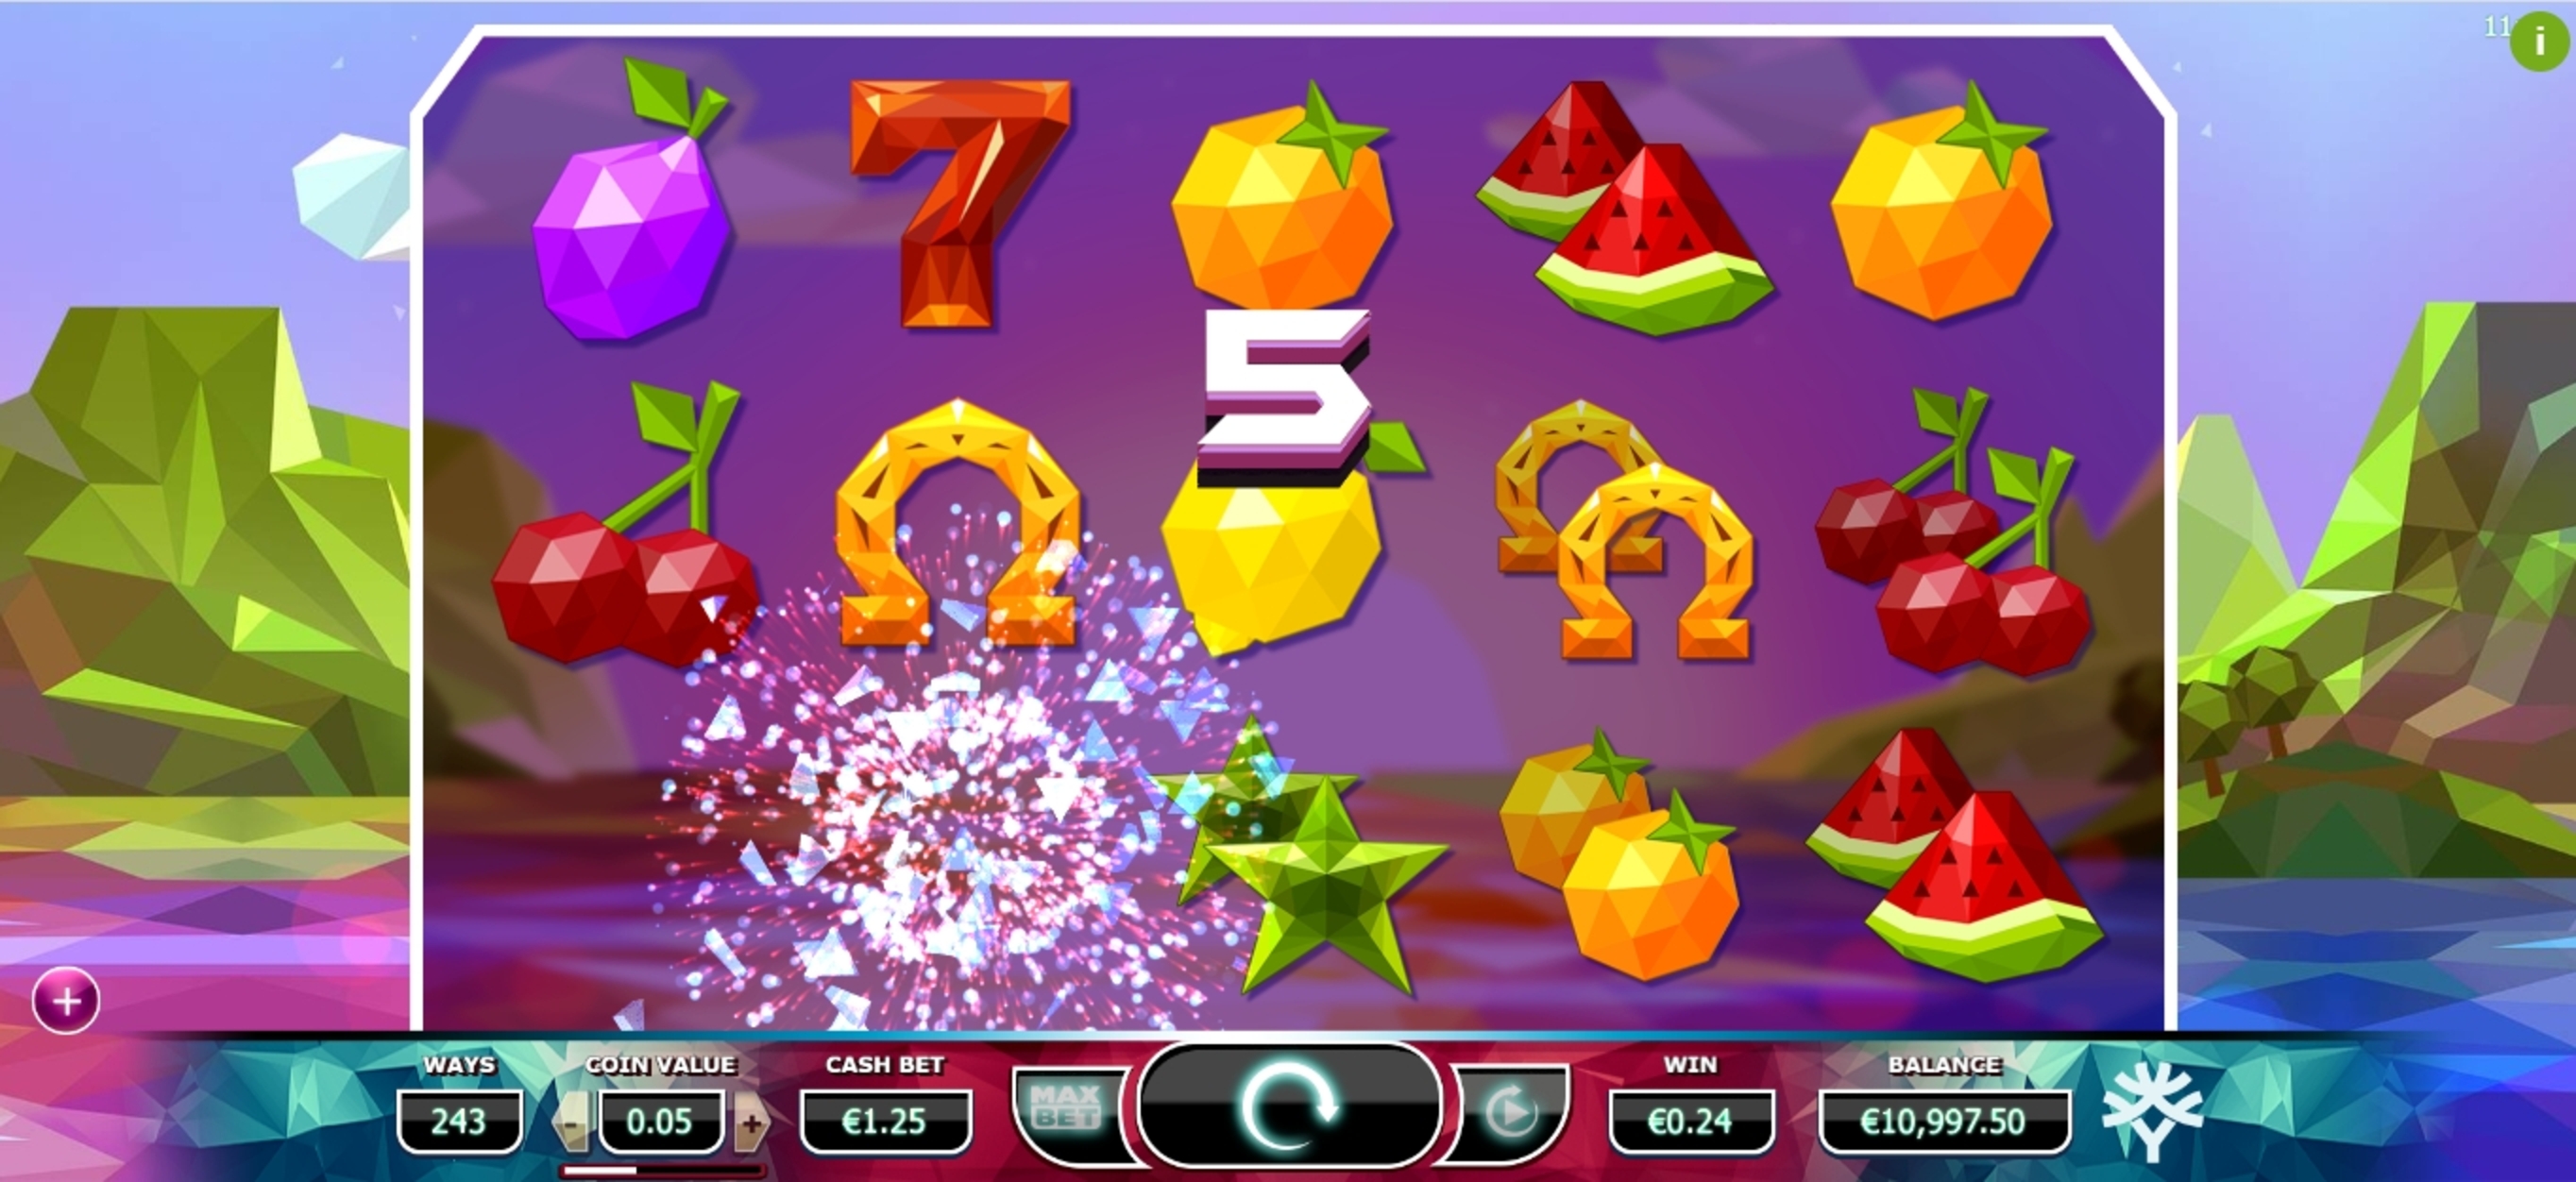 Win Money in Doubles Free Slot Game by Yggdrasil Gaming